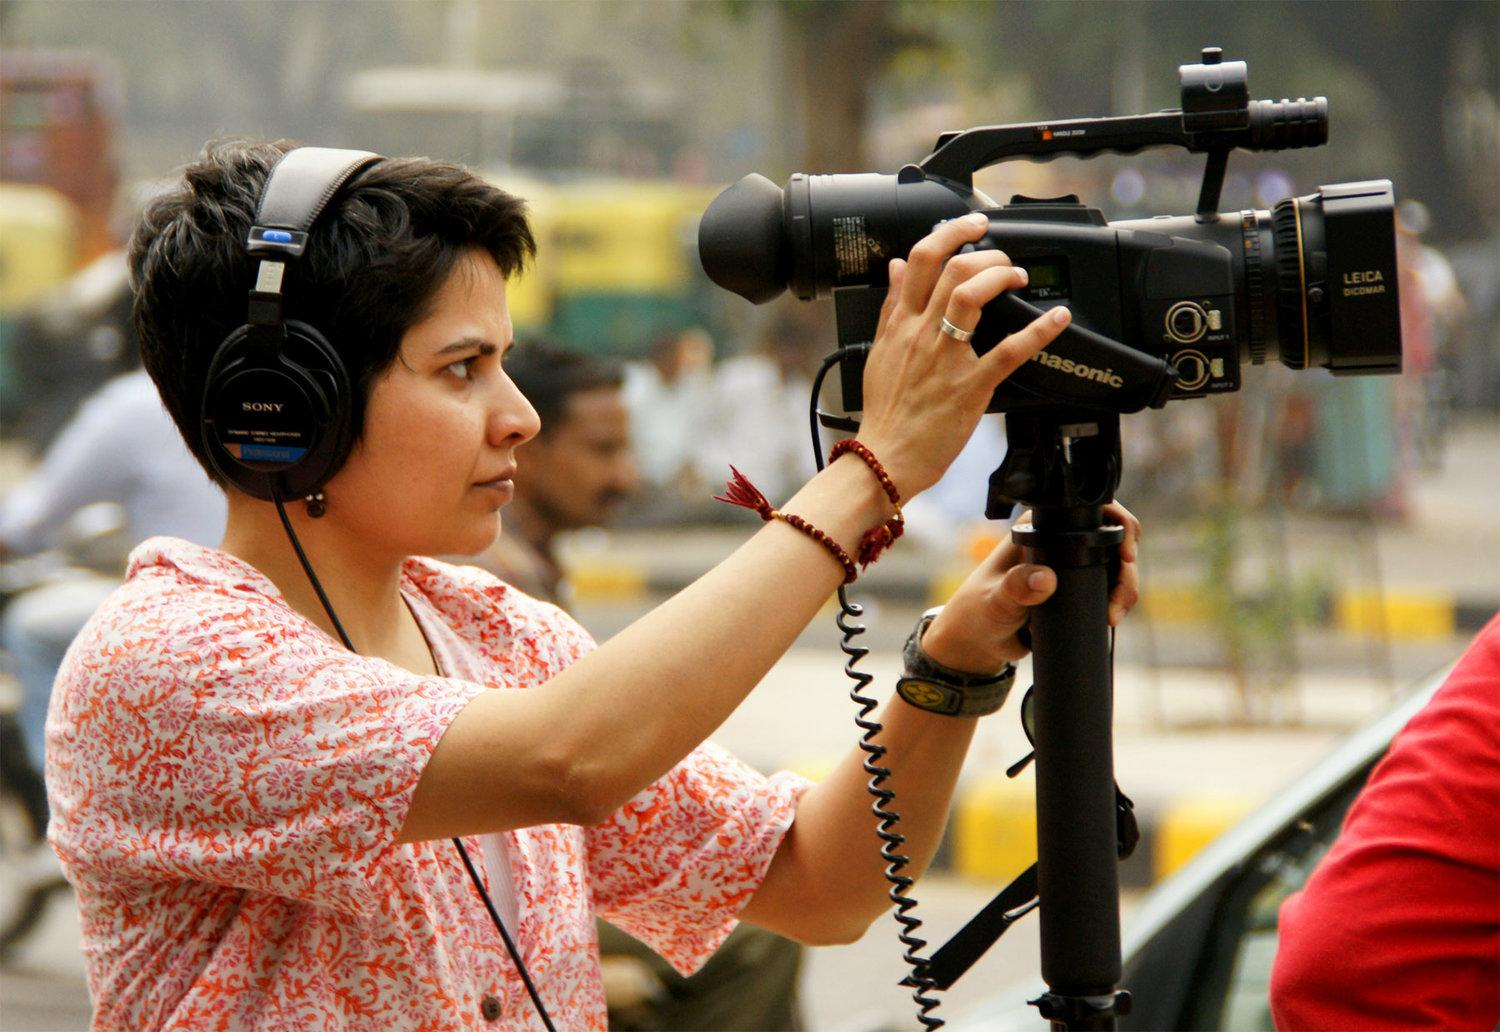 A Brown, badass, butch dyke is shooting a scene with queer rights protesters (offscreen) on the streets of New Delhi, with a video camera on a monopod and headphones covering her ears.